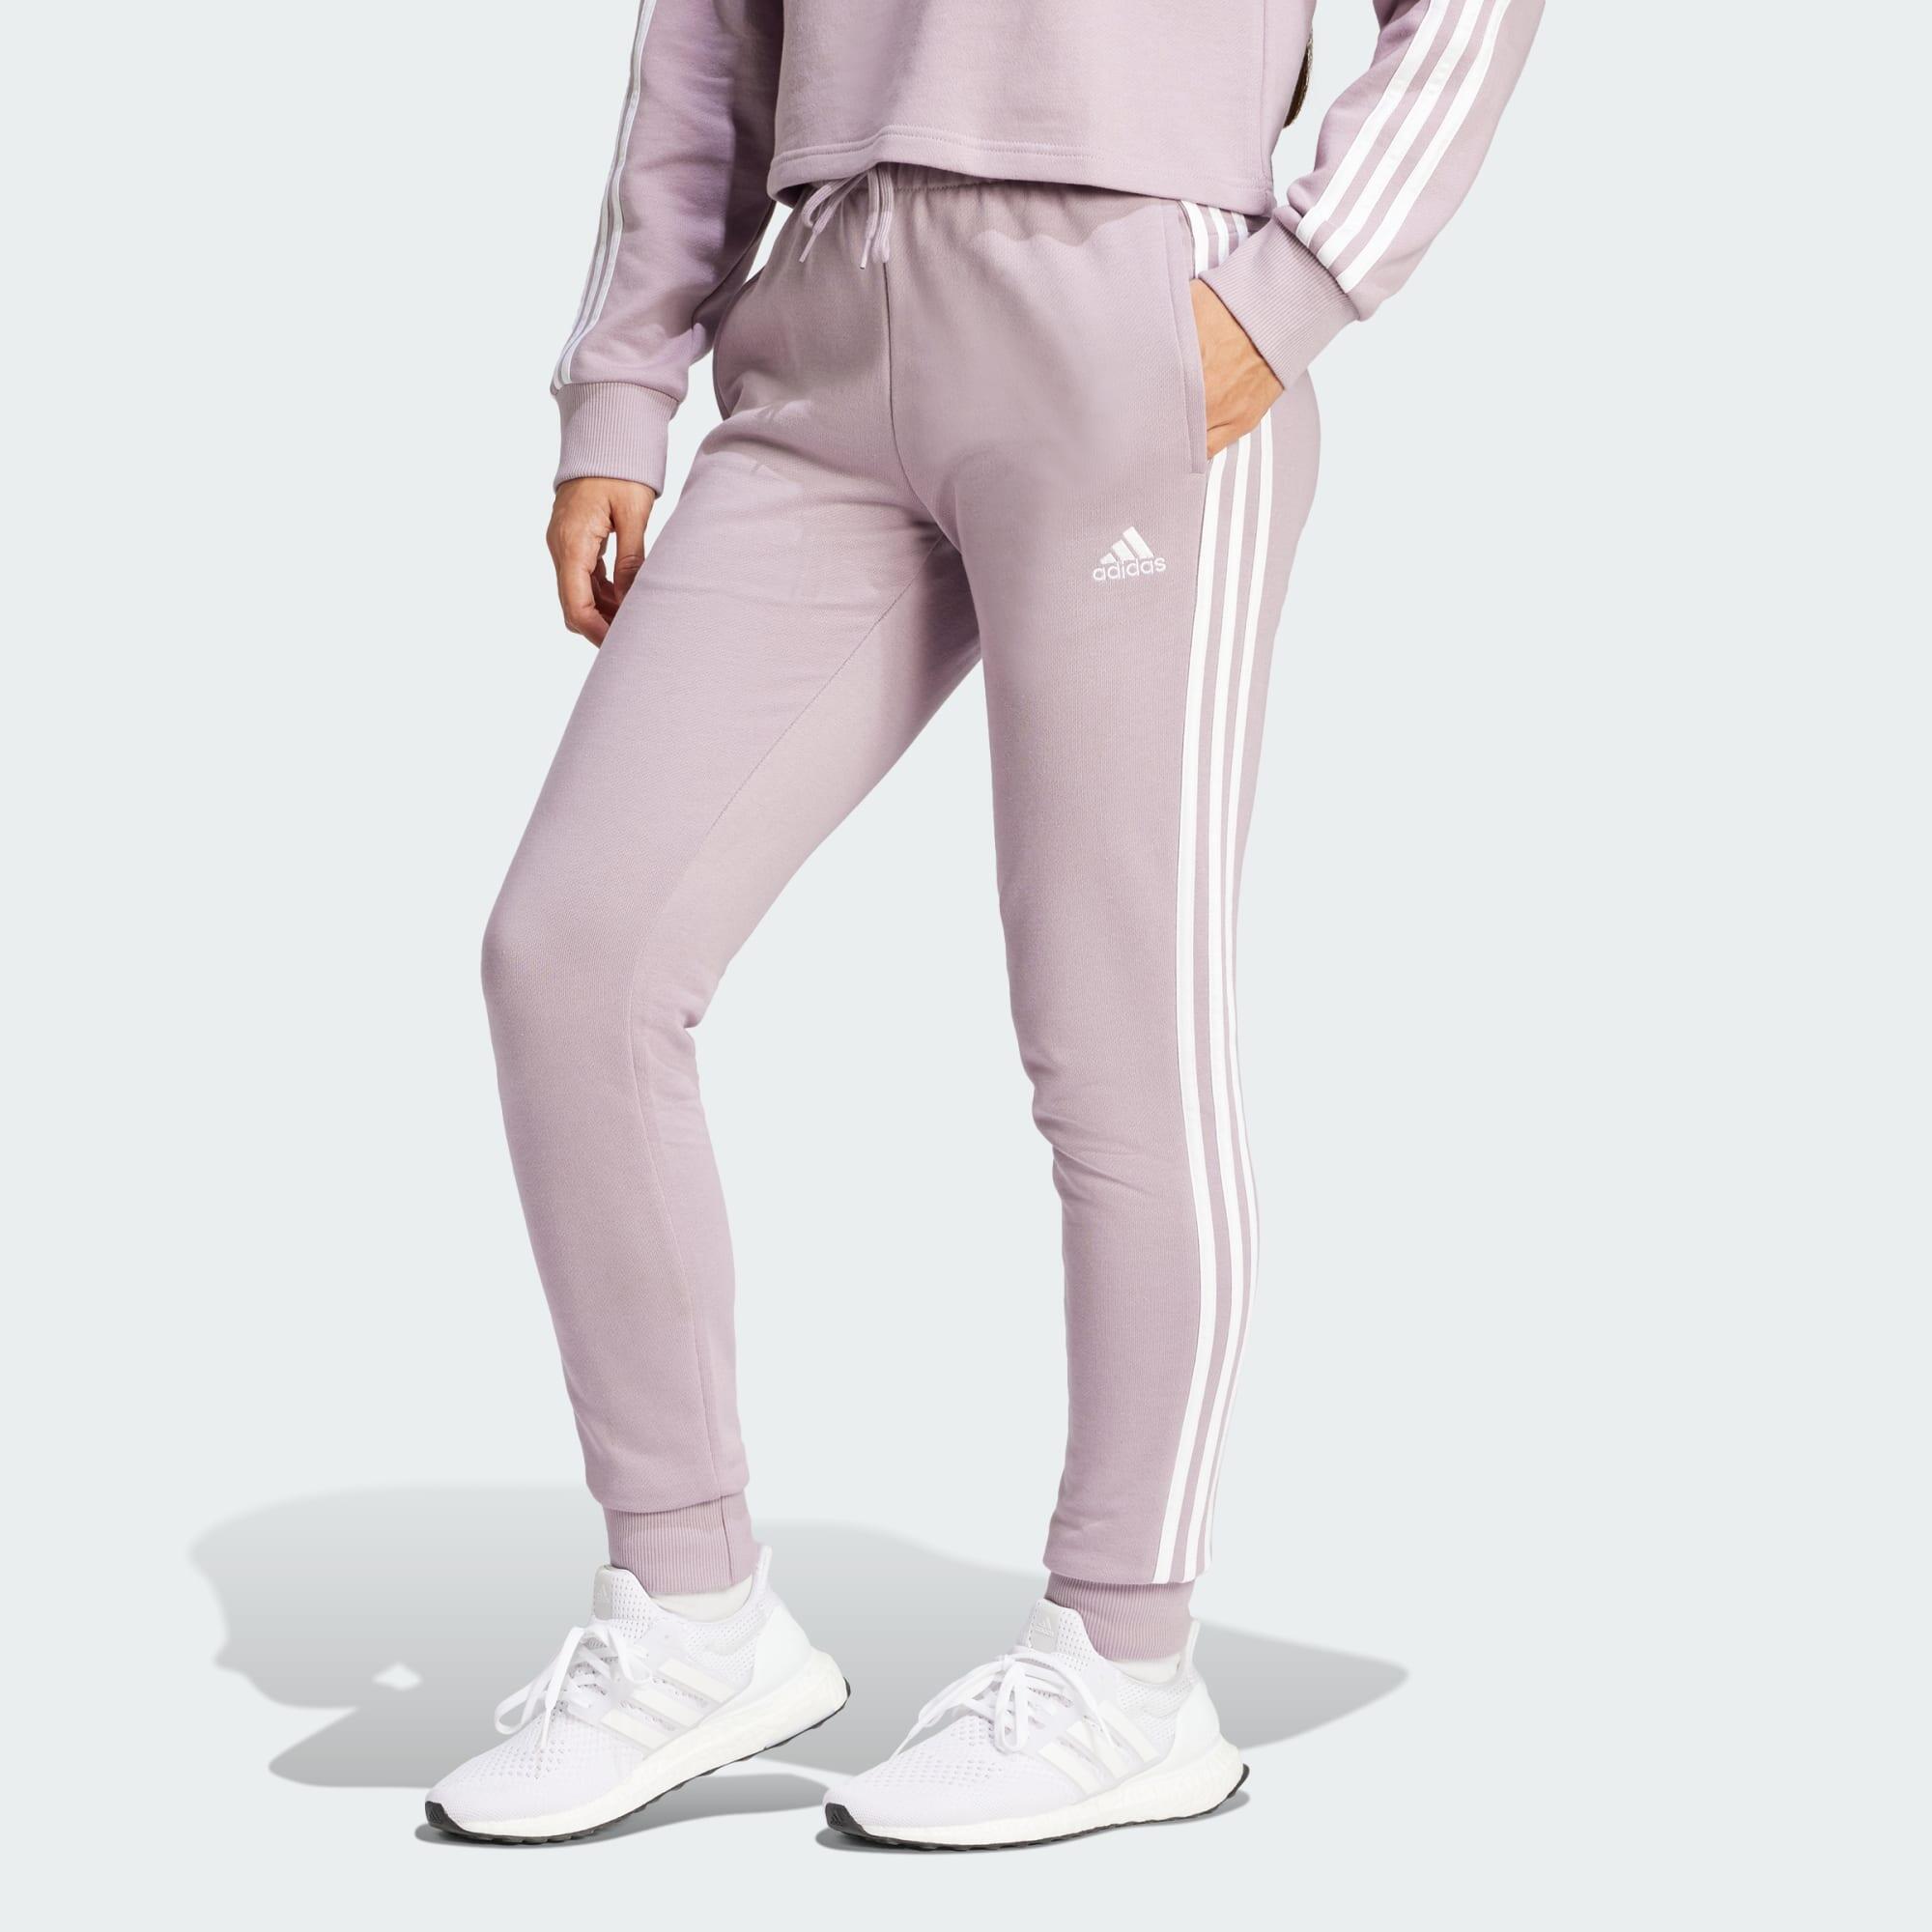 ADIDAS Essentials 3-Stripes French Terry Cuffed Pants